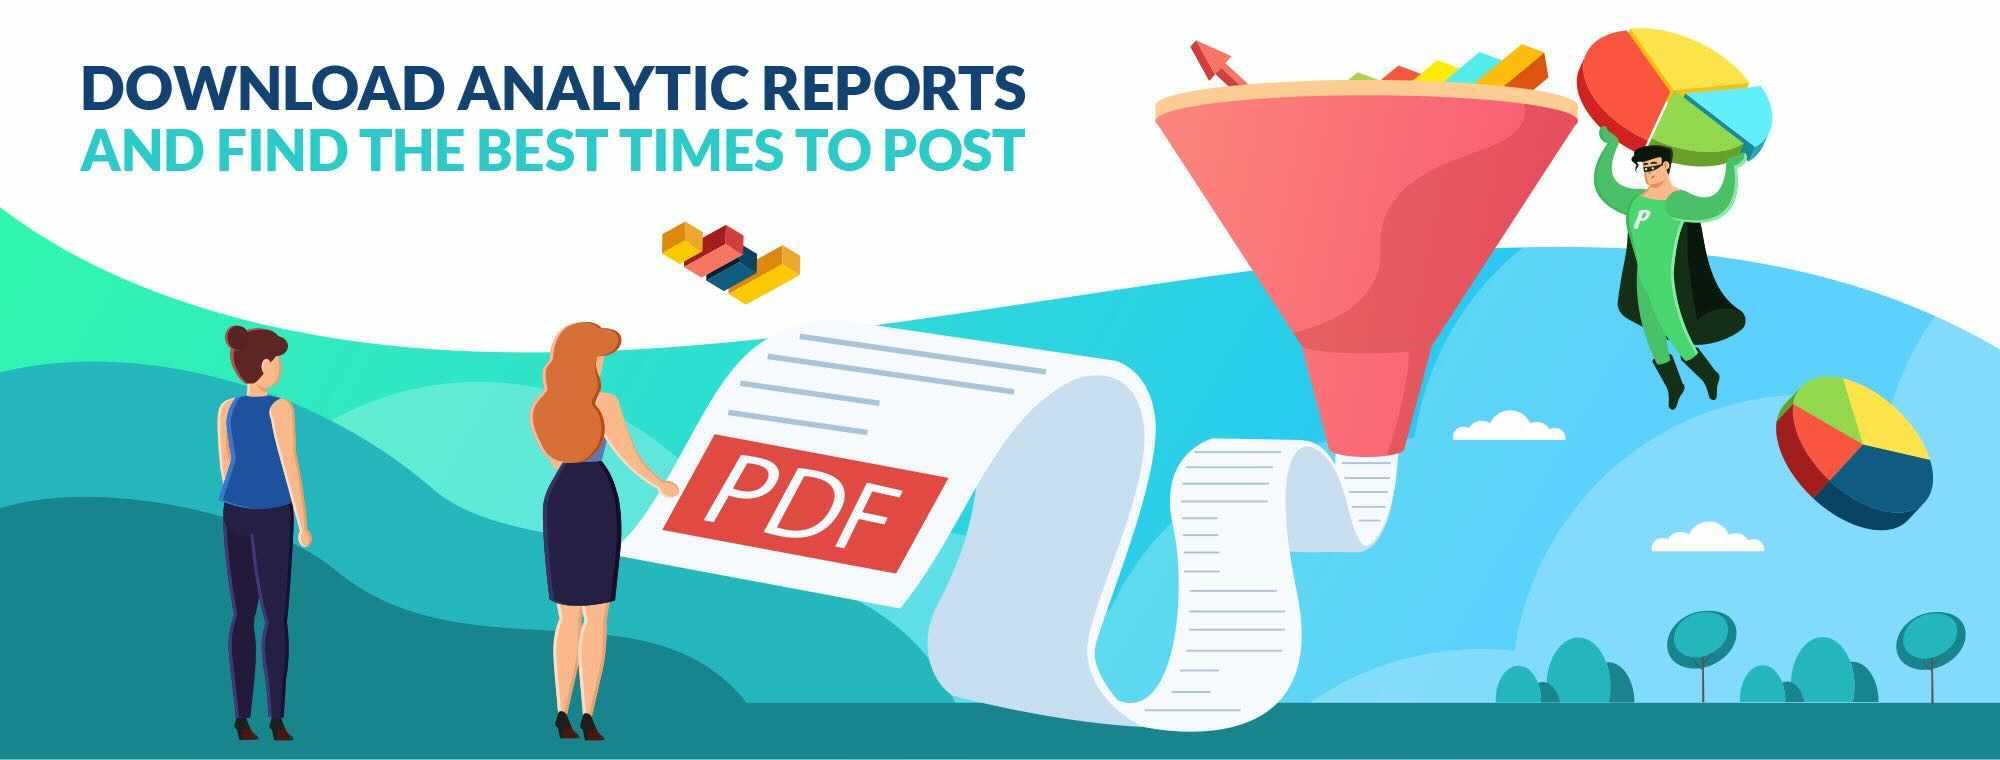 Grow your business with in-depth analytic reports from all social networks on Publer. Discover best times to post and top-performing content.